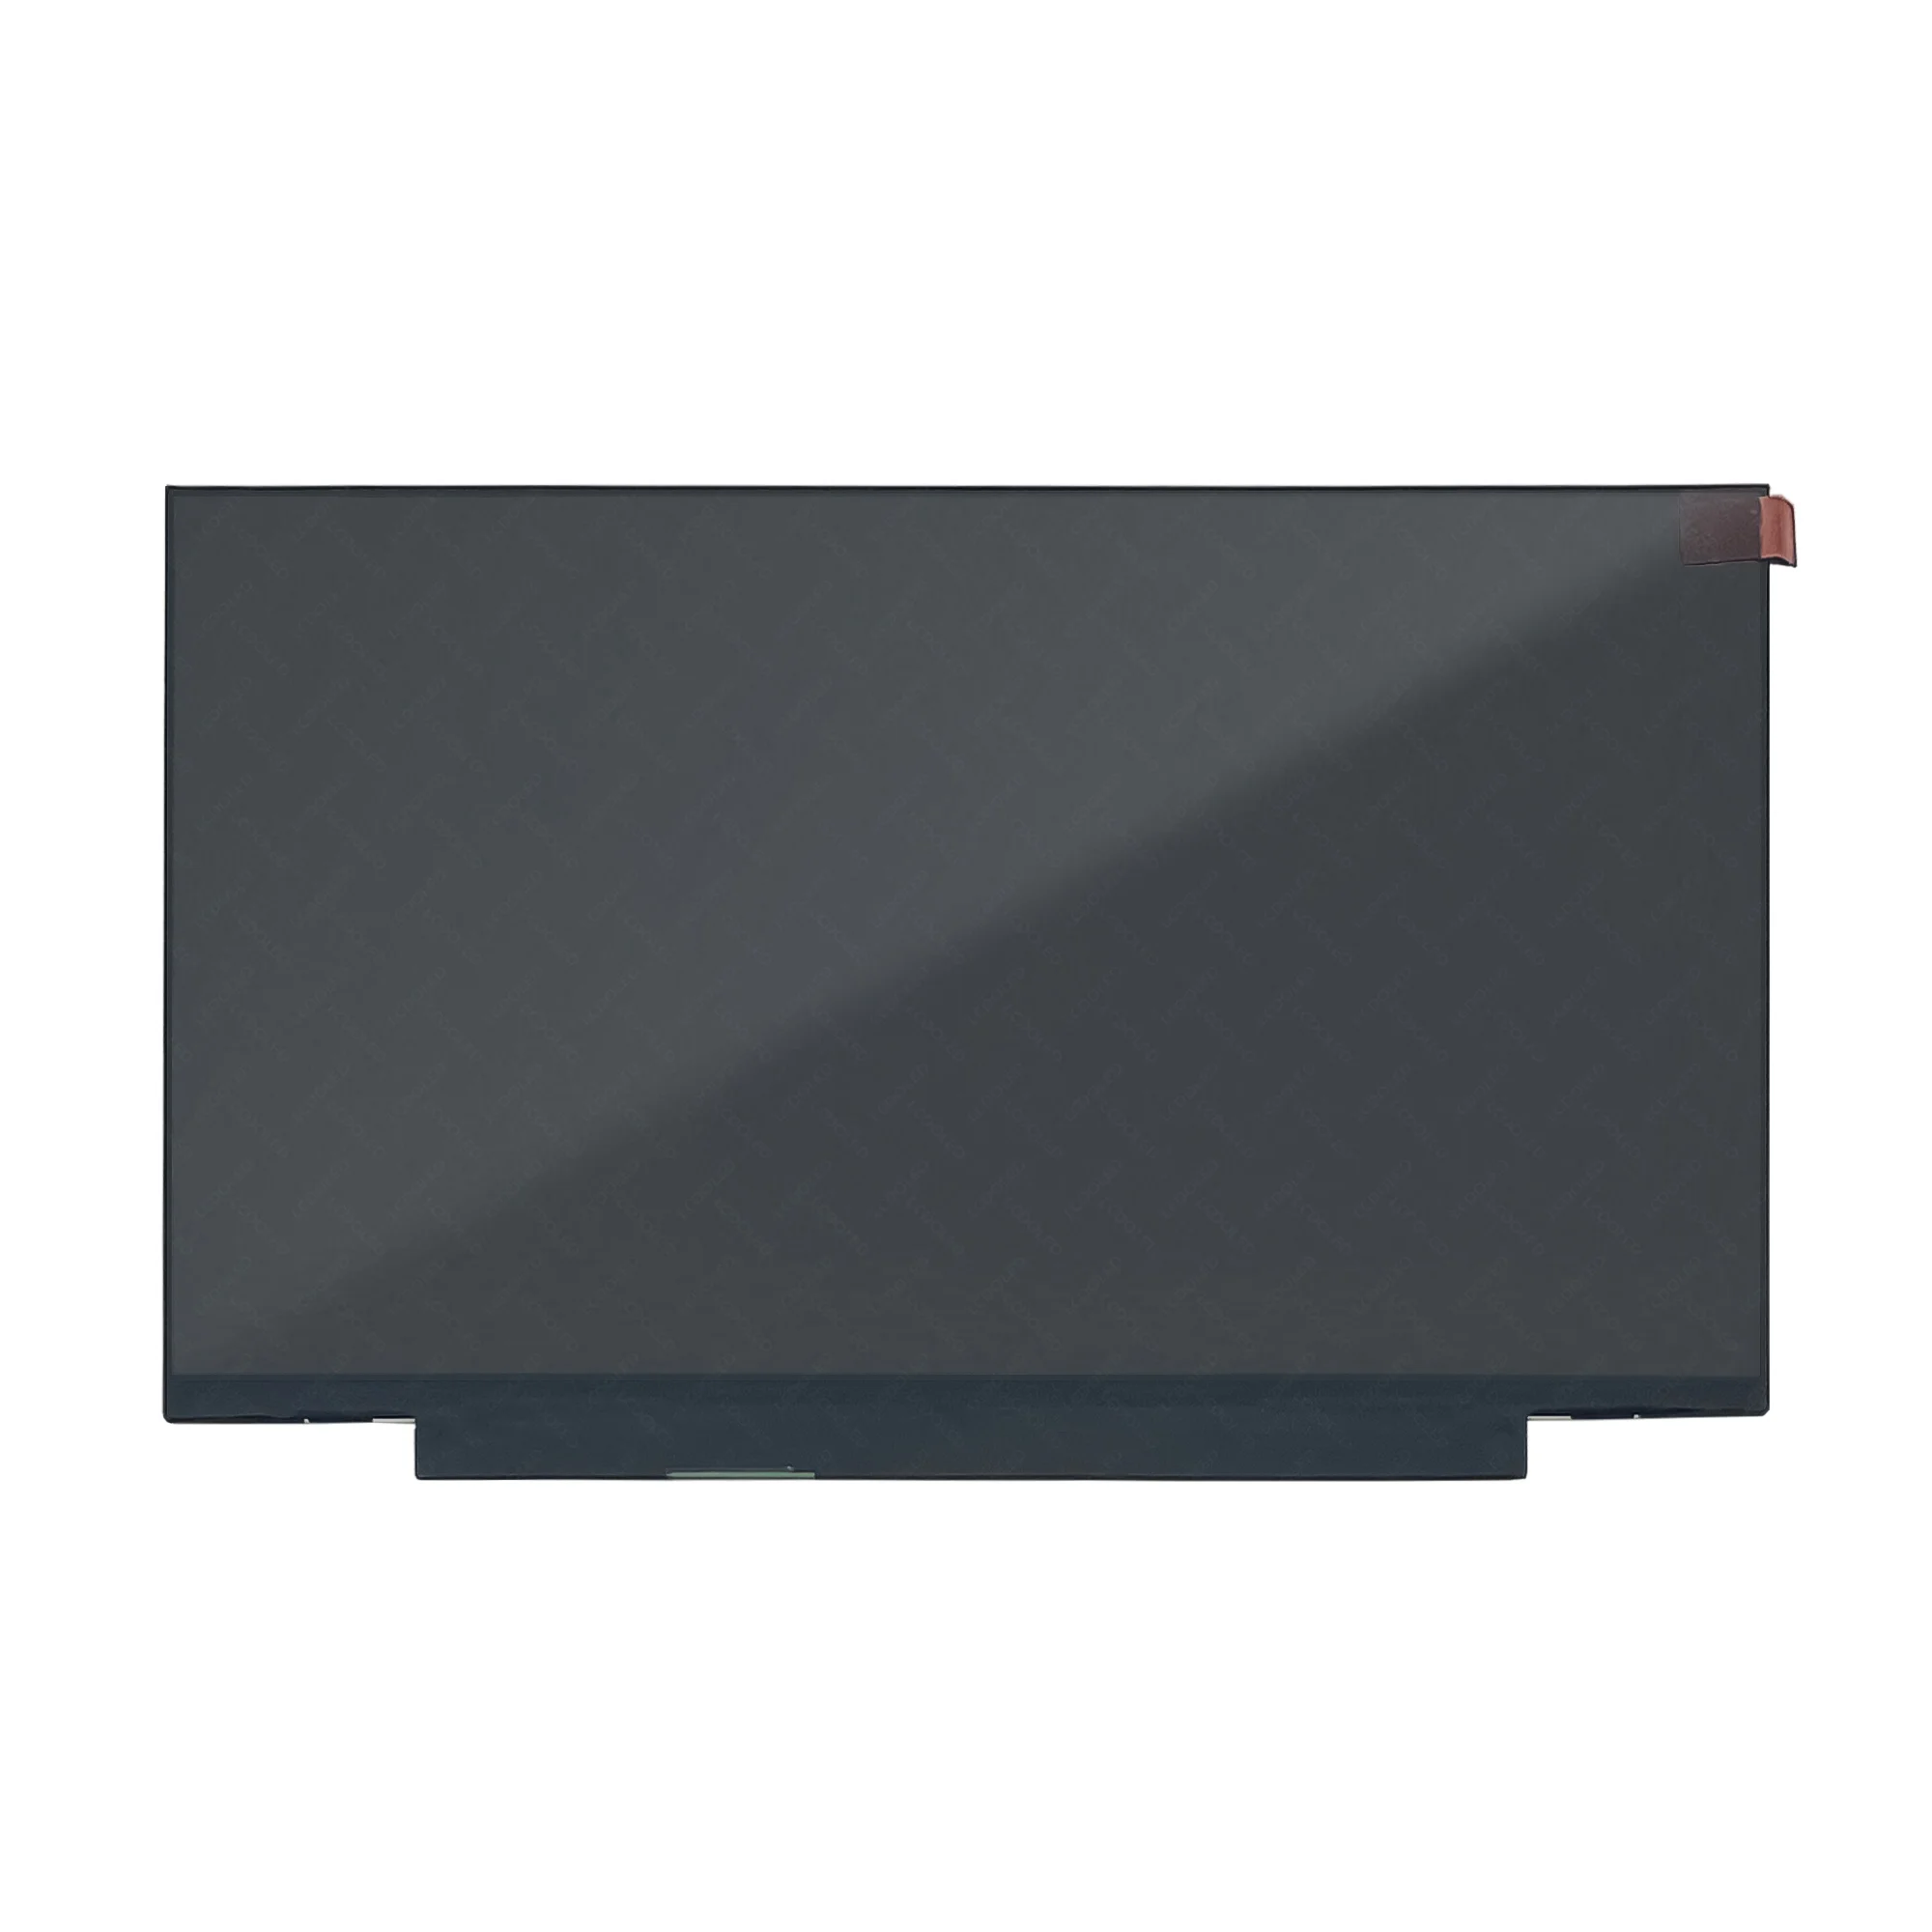 

144Hz 14.0'' FHD IPS LCD Screen Display Non-Touch Panel Matrix LM140LF1F02 For Asus Rog Zephyrus G14 GA401 1920X1080 40 Pins eDP